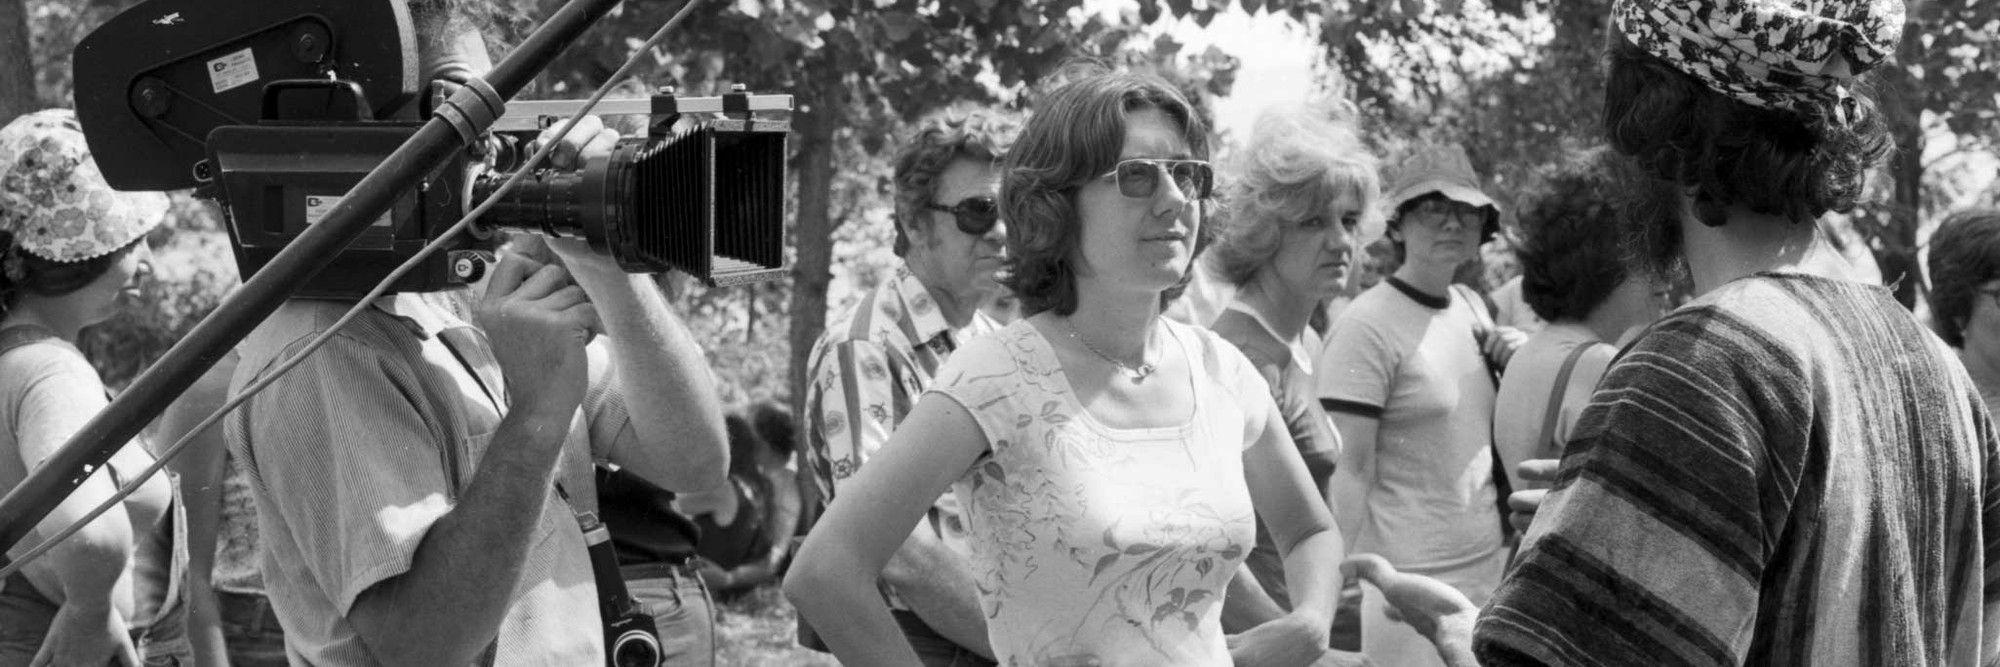 Julia Reichert on the set of Seeing Red: Stories of American Communists. 1983. USA. Directed by Julia Reichert, Jim Klein. Photo: Tony Heriza. Courtesy of Steven Bognar